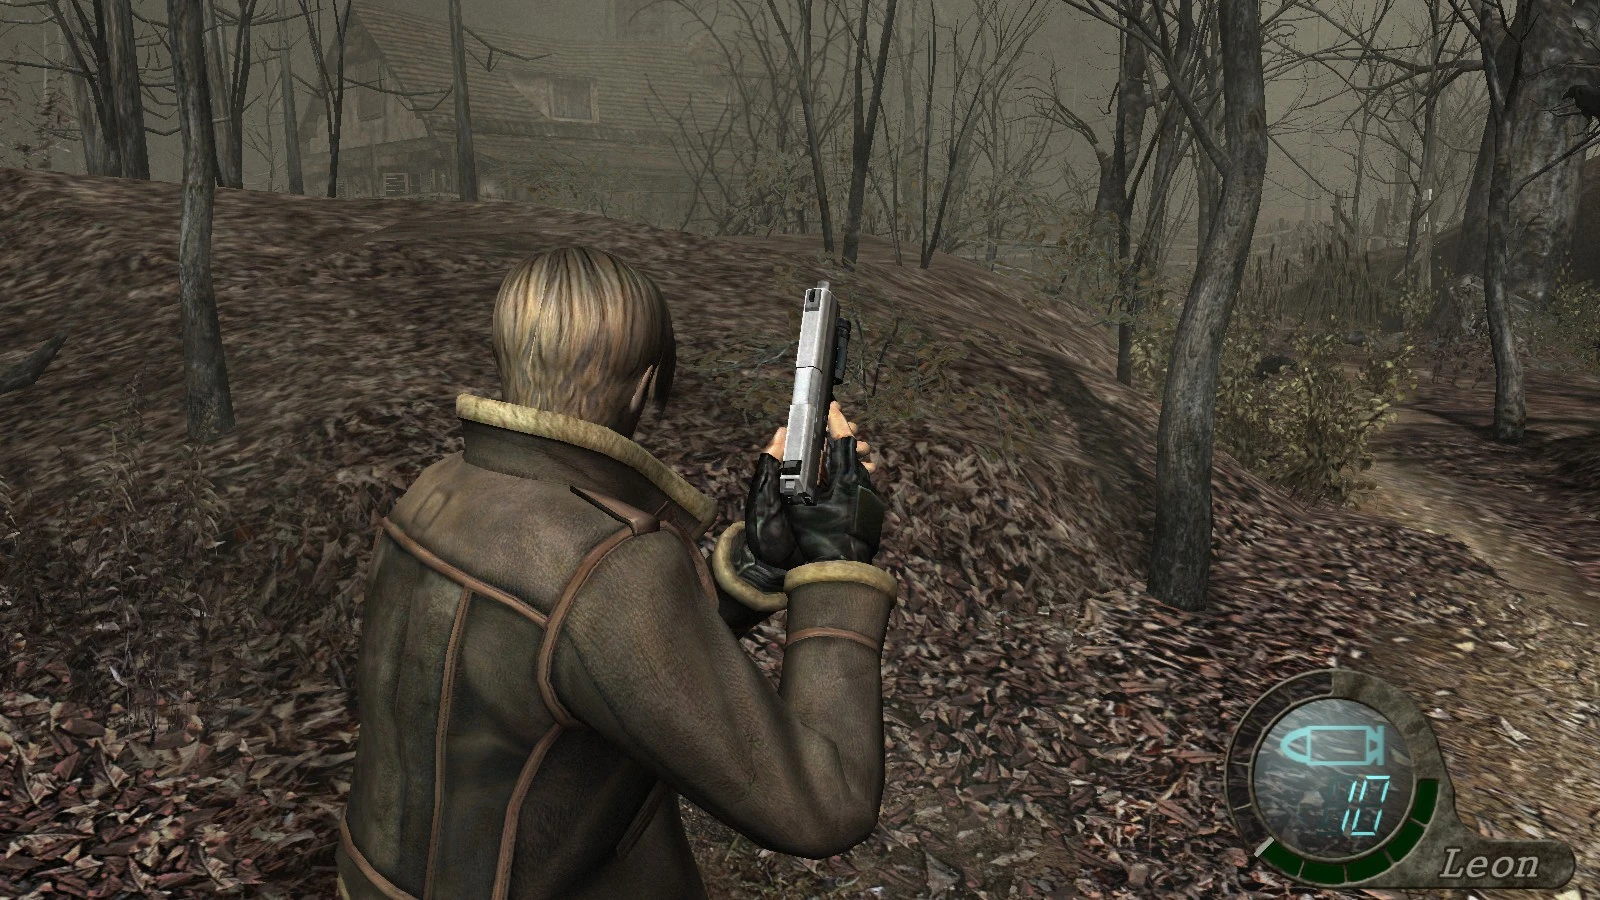 Mod categories at Resident Evil 4 Nexus - Mods and community